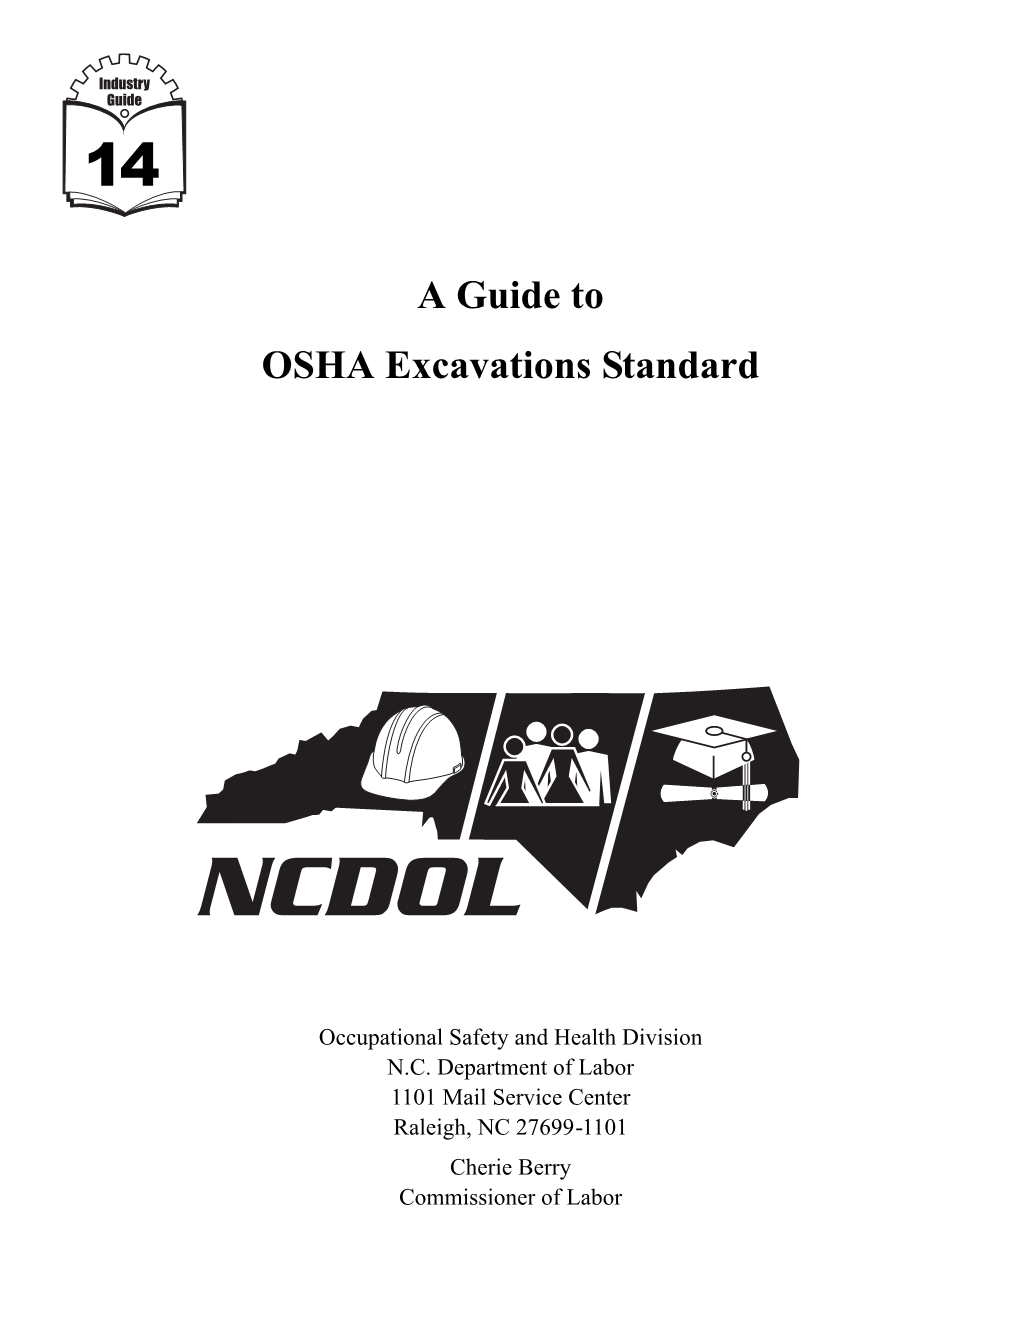 A Guide to OSHA Excavations Standard